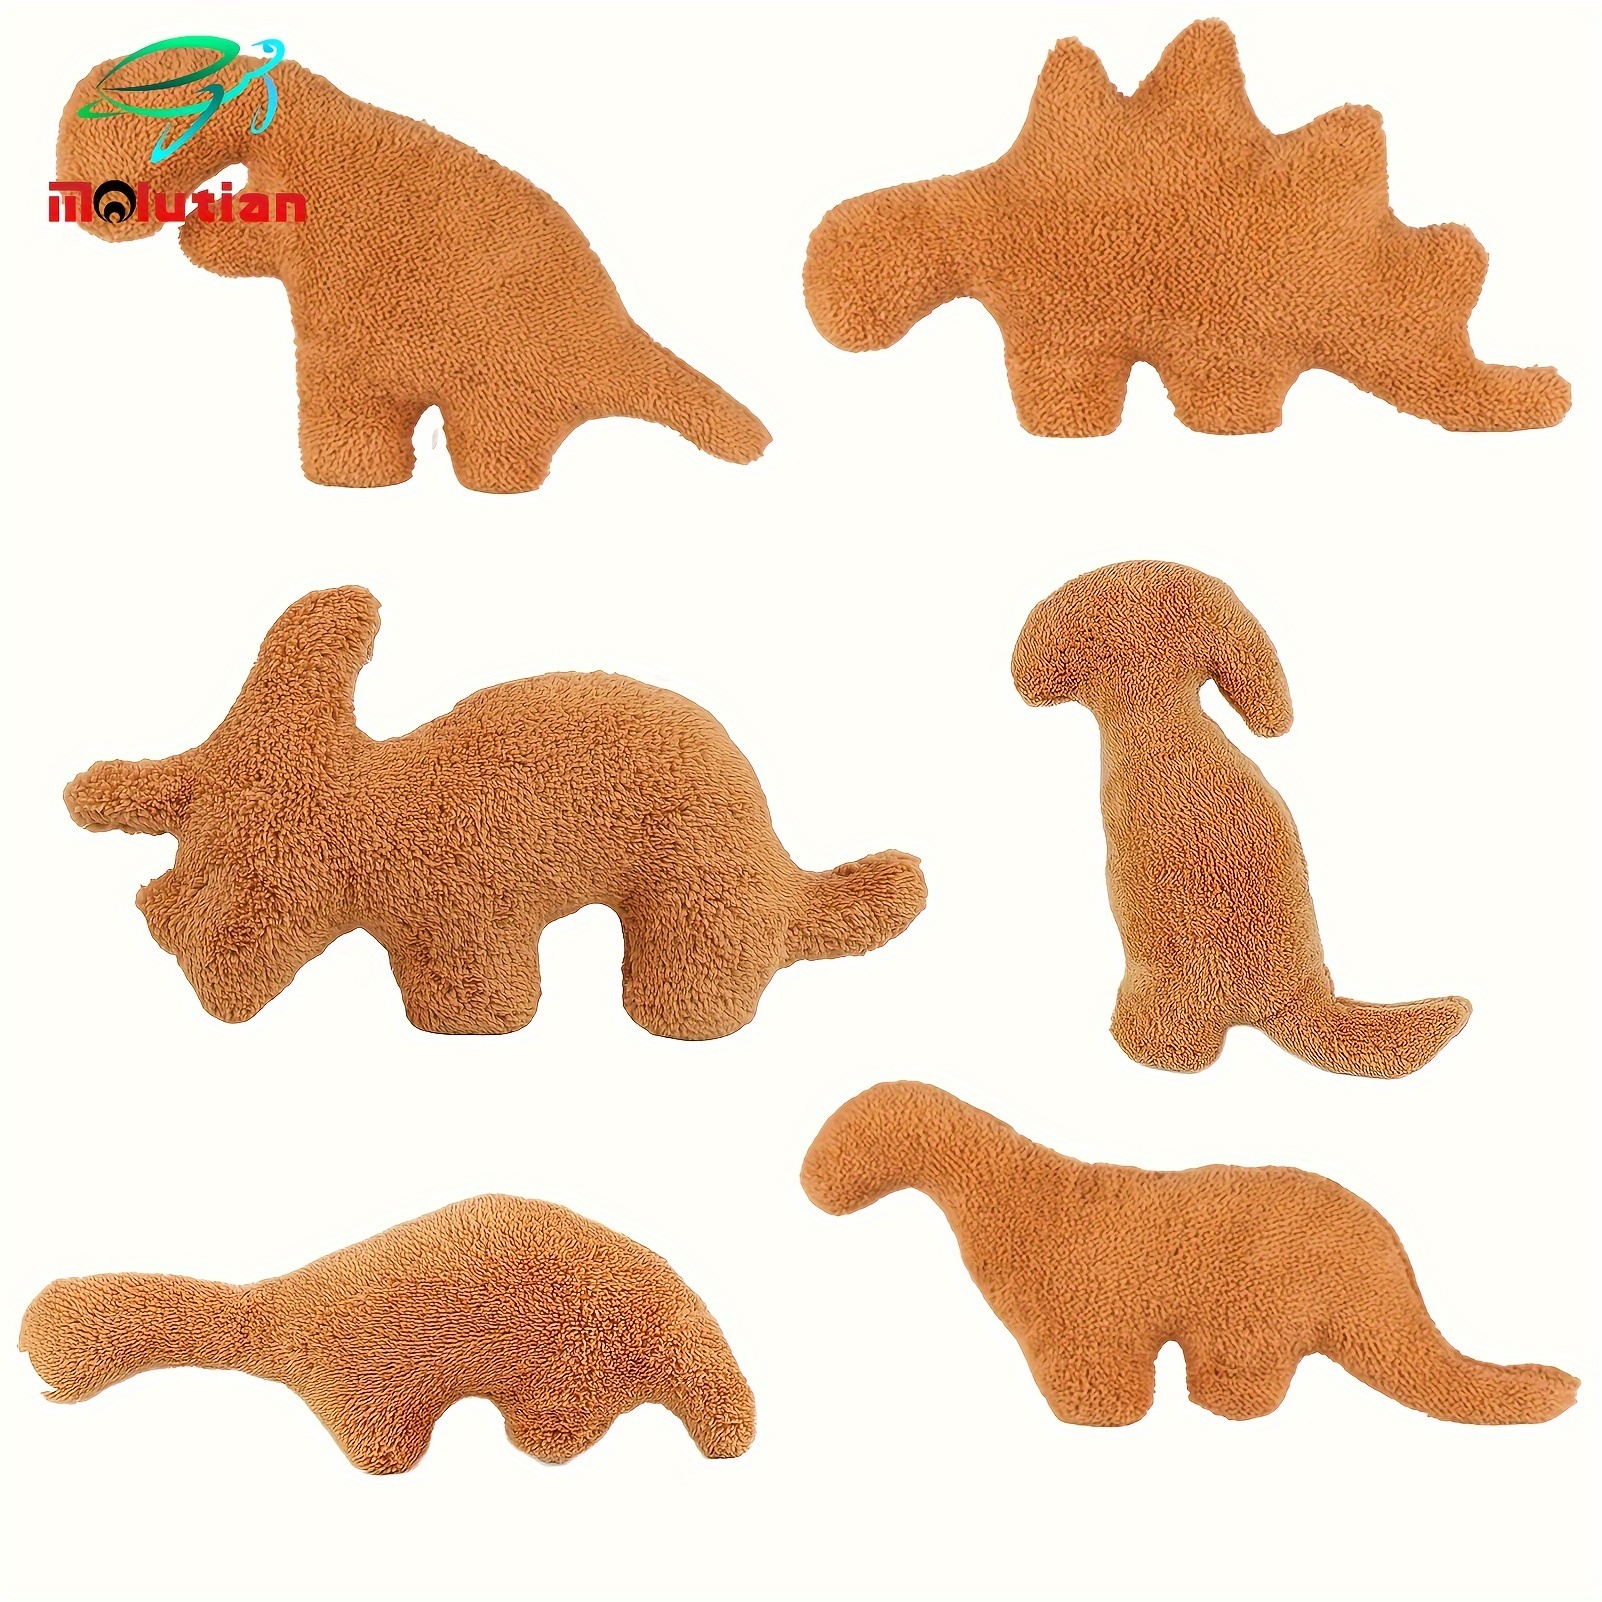 

6 Style Dino Nugget Pillow Chicken Nugget Pillow Plush Creative Gift For Easter Decorations And Birthday Decorations Can't Stand Still Ideas For Boys And Girls